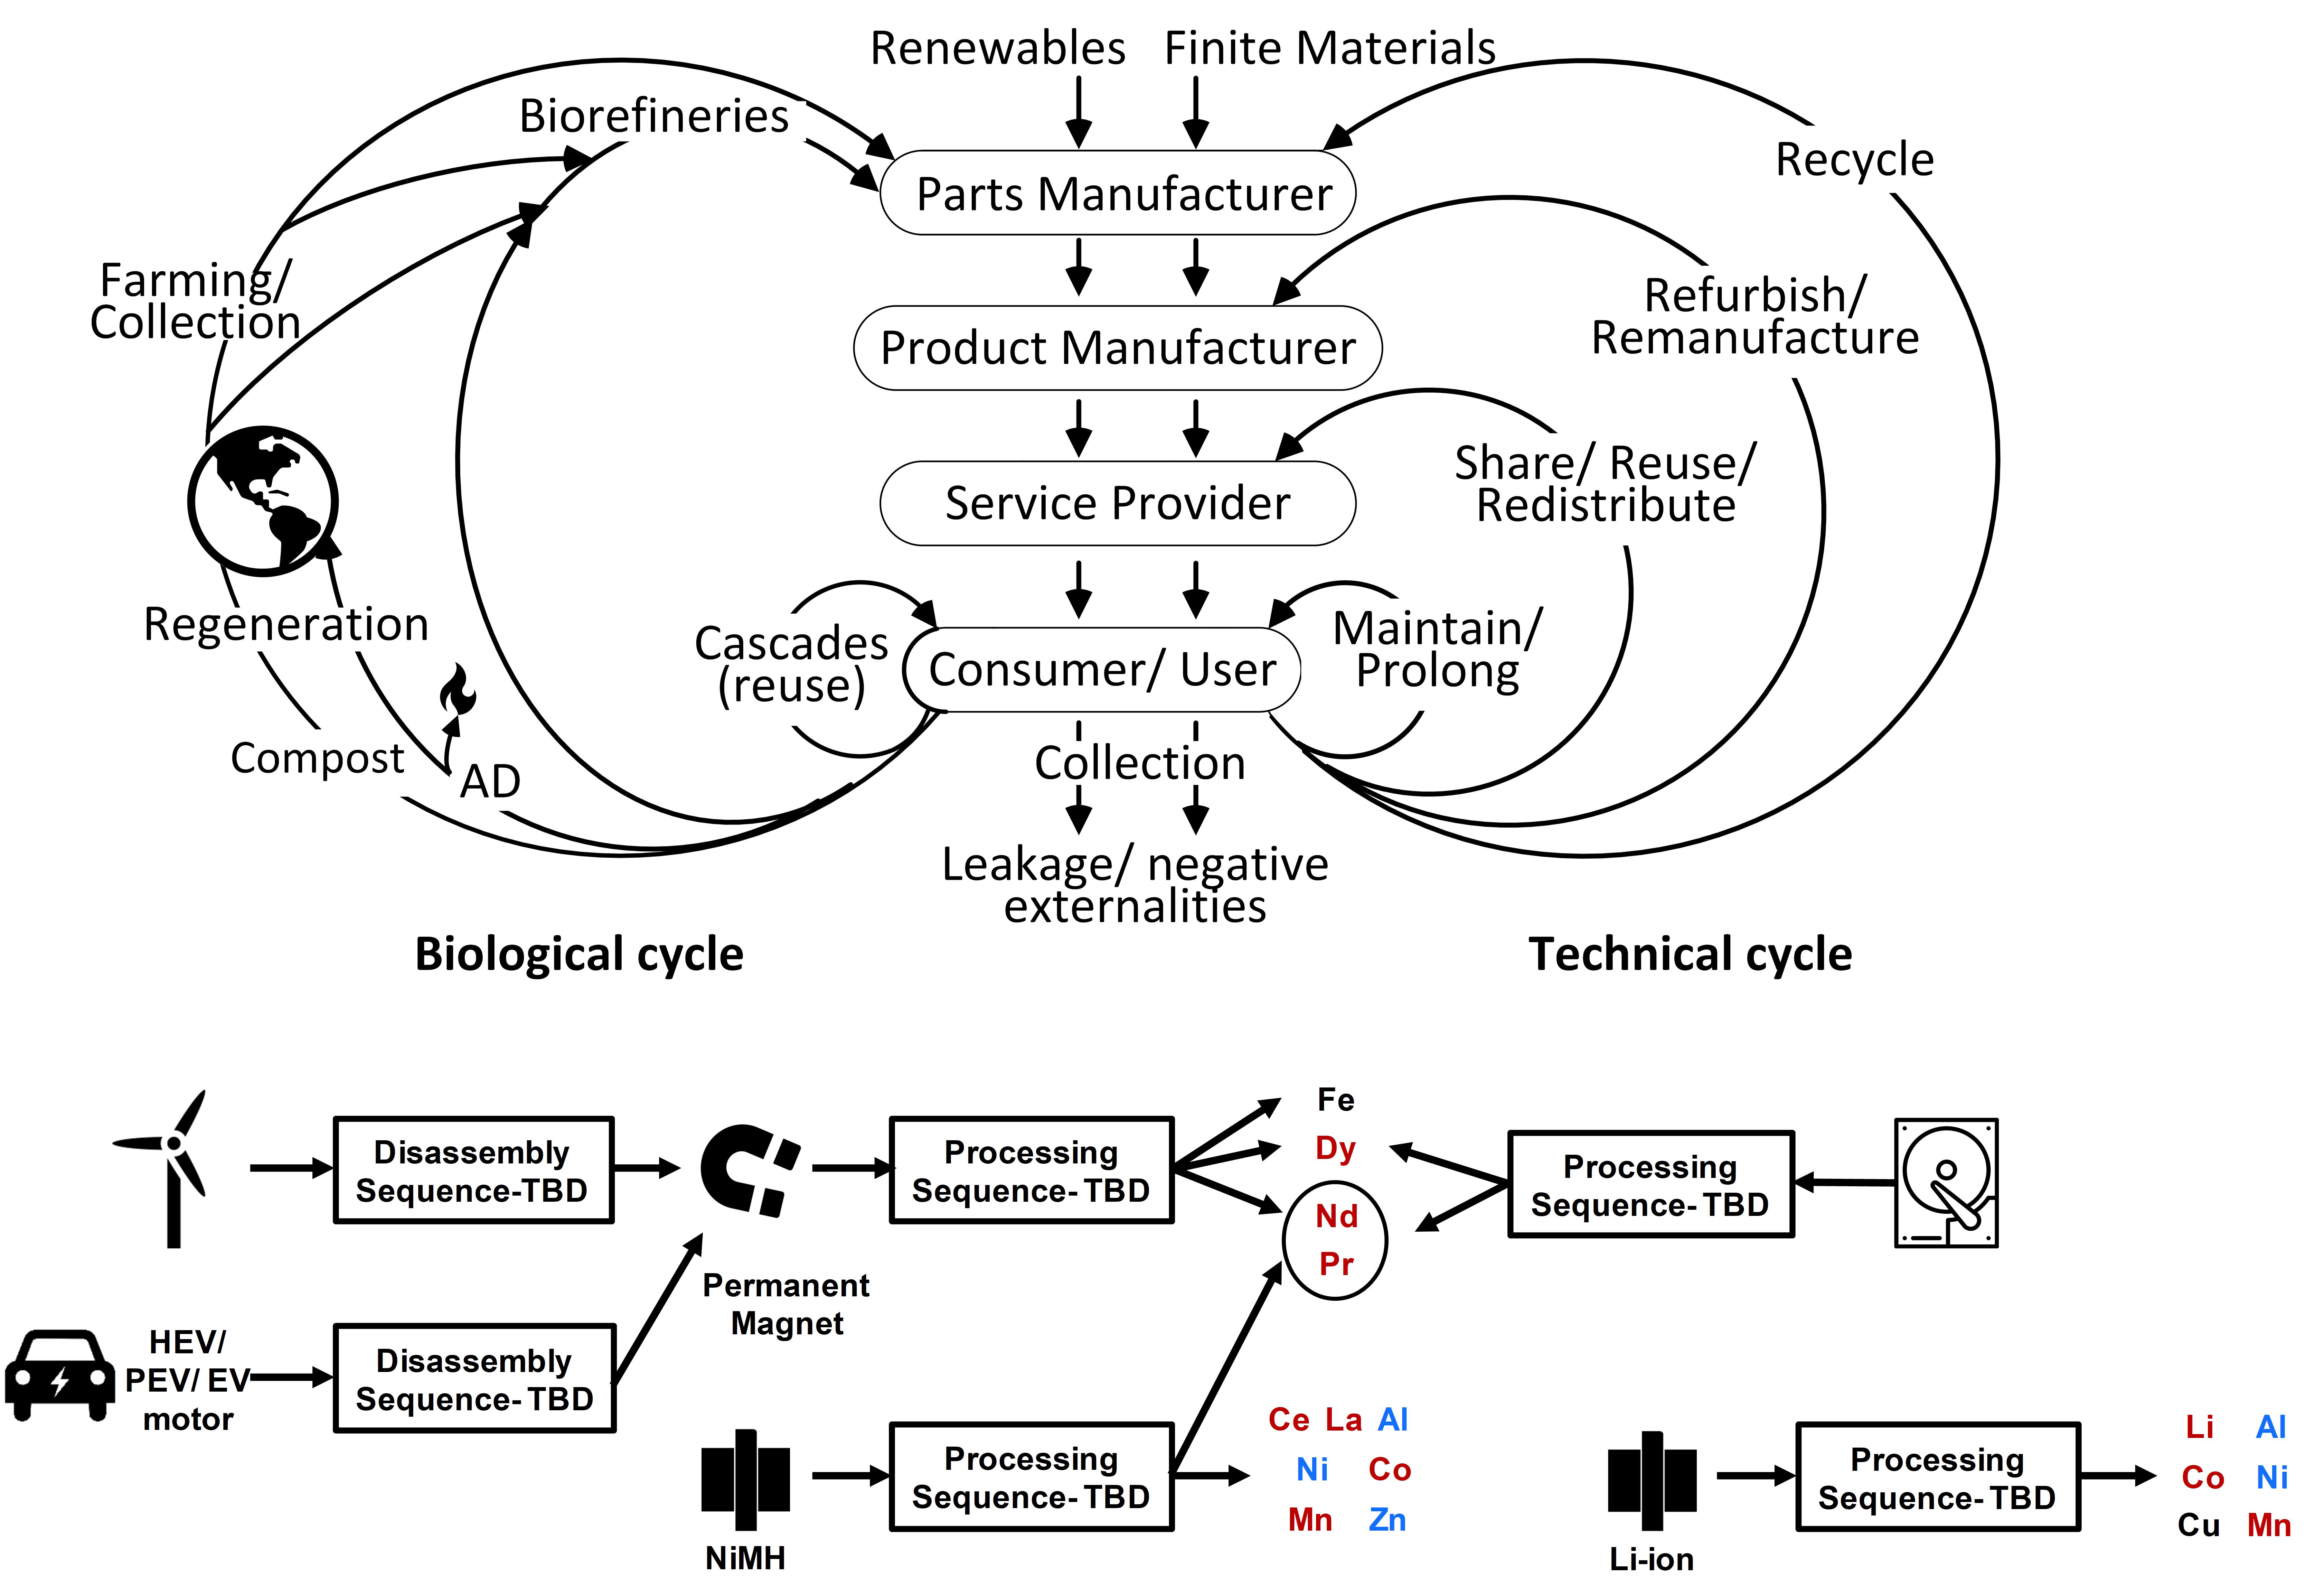 Recovery of materials from end-of-life- products- Circular Economy 